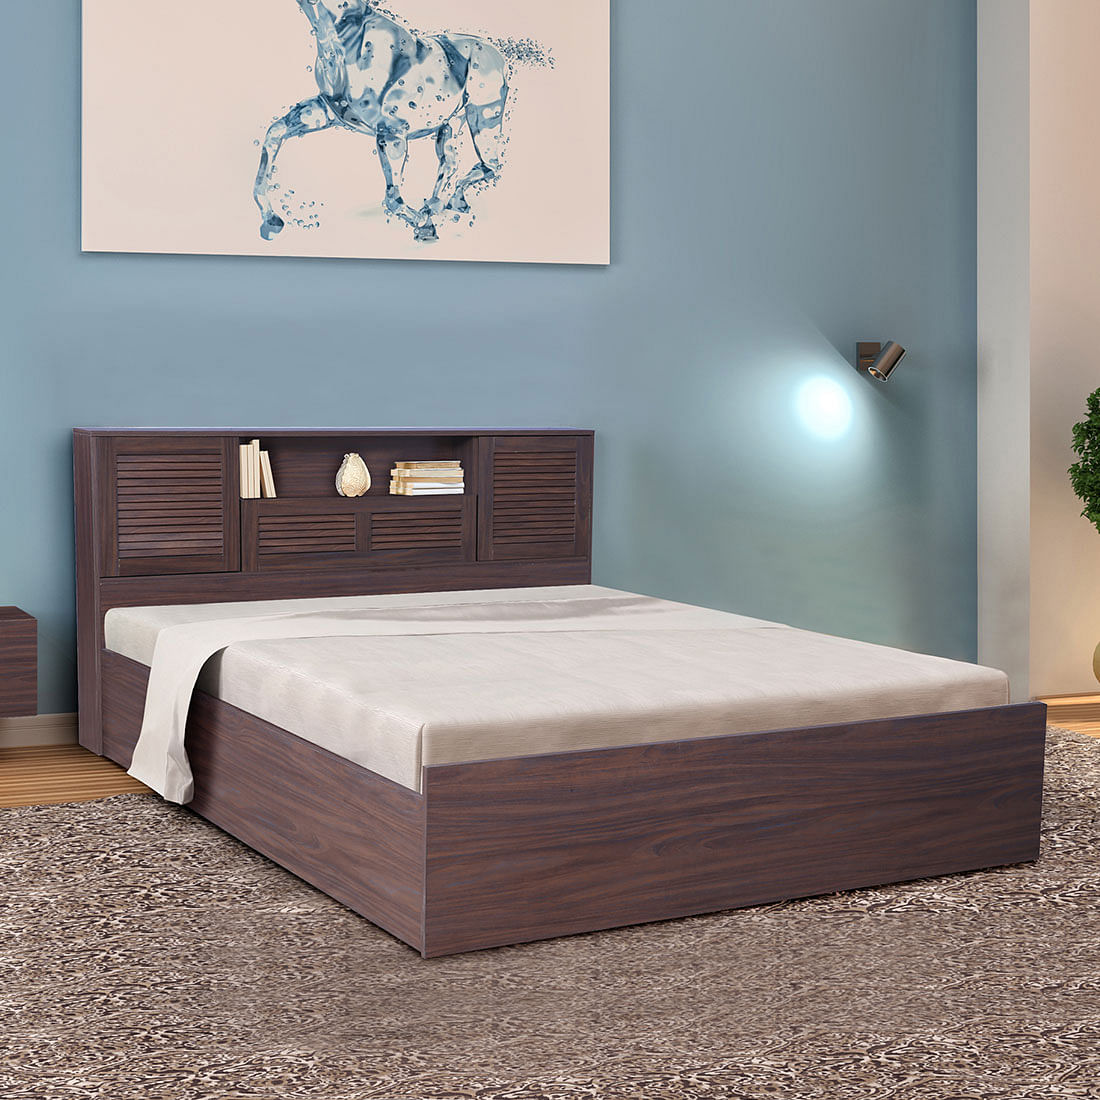 Buy Bolton Queen bed with Box storage in Walnut Colour Online at ...